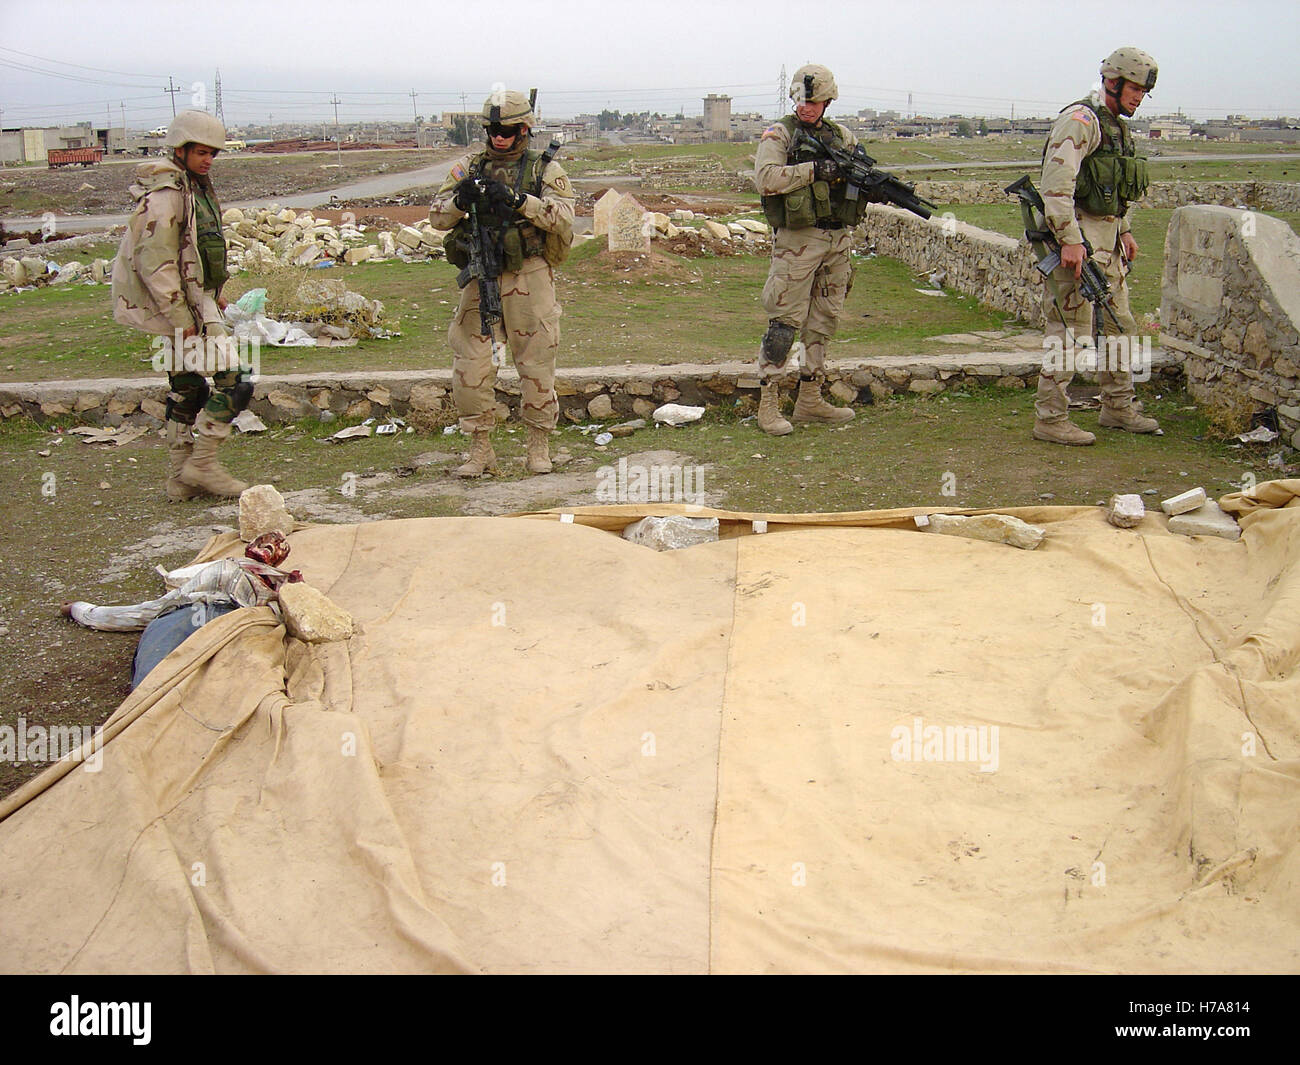 26th November 2004 U.S. soldiers examine dead bodies, dumped by insurgents in a cemetery in Mosul, northern Iraq. Stock Photo